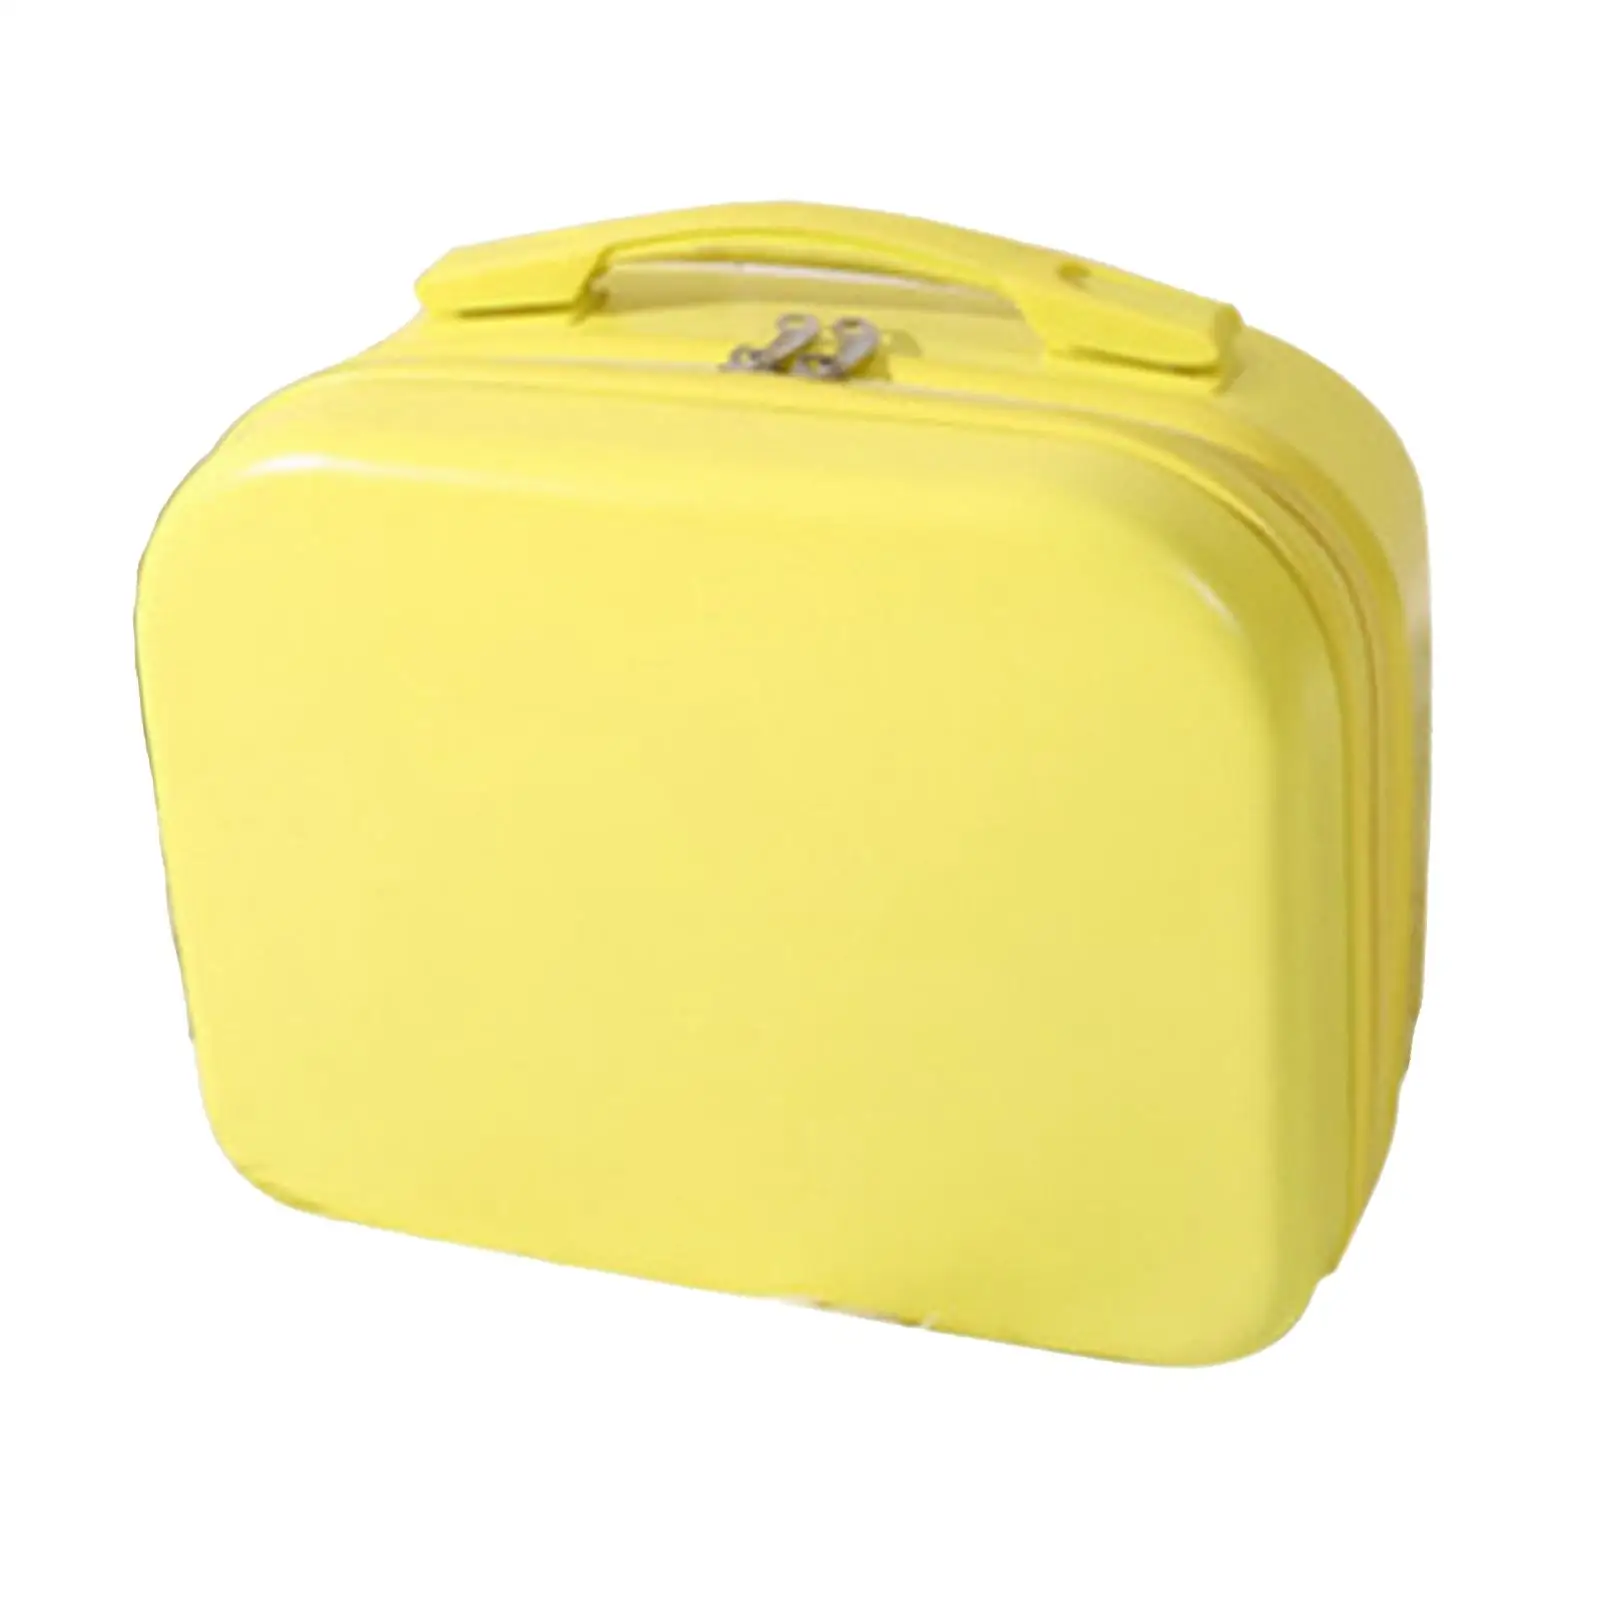 Girls Women Luggage Carrying Makeup Case Suitcase Travel Small Jewelry Box